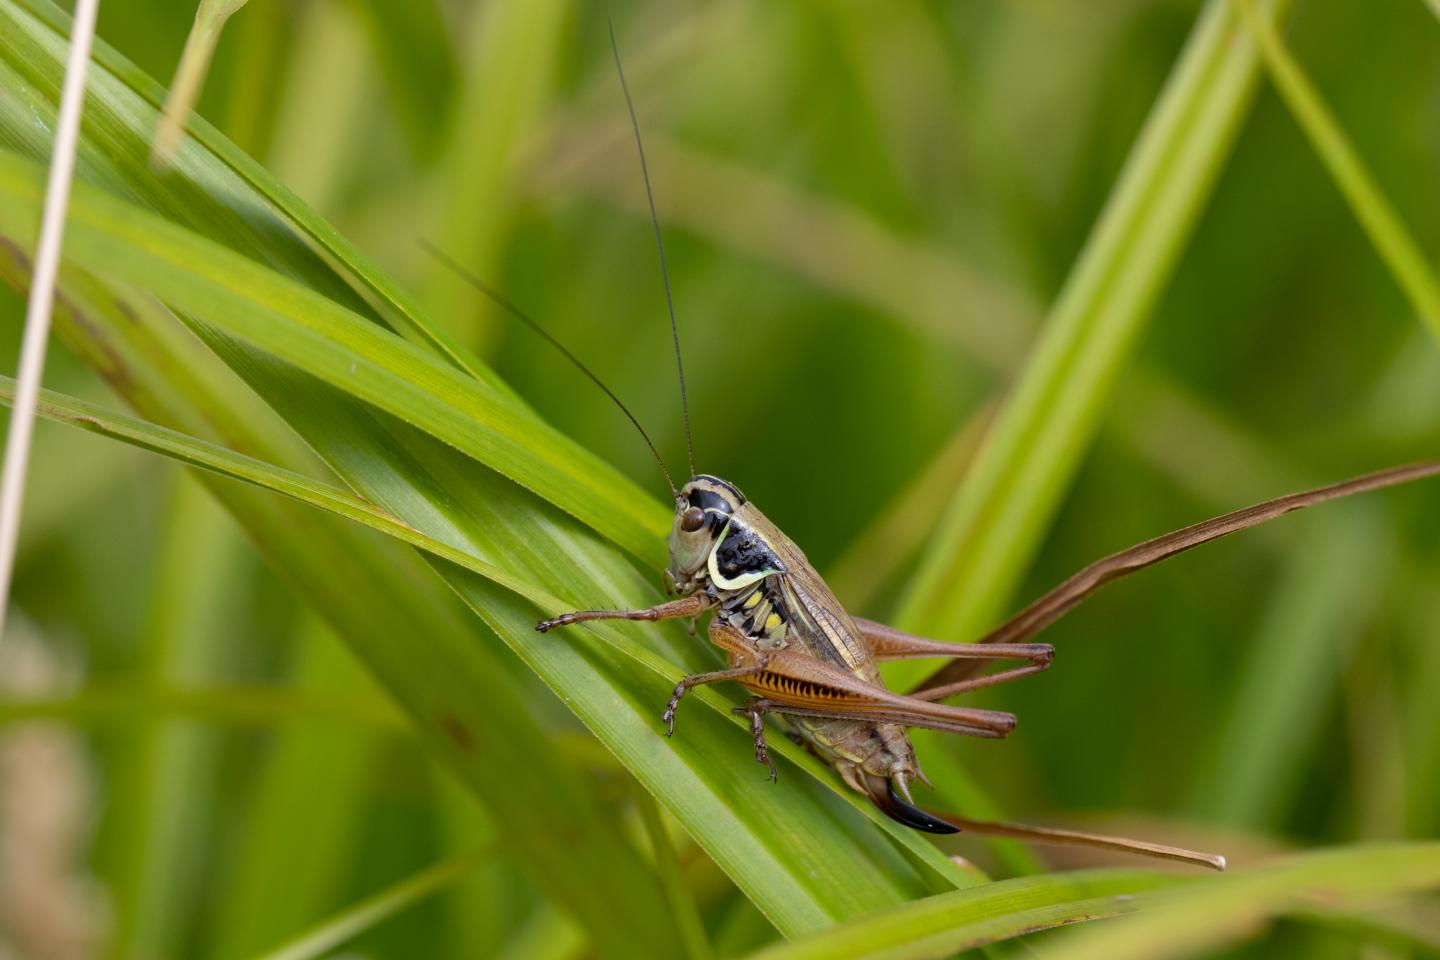 Crickets migrating in high elevations